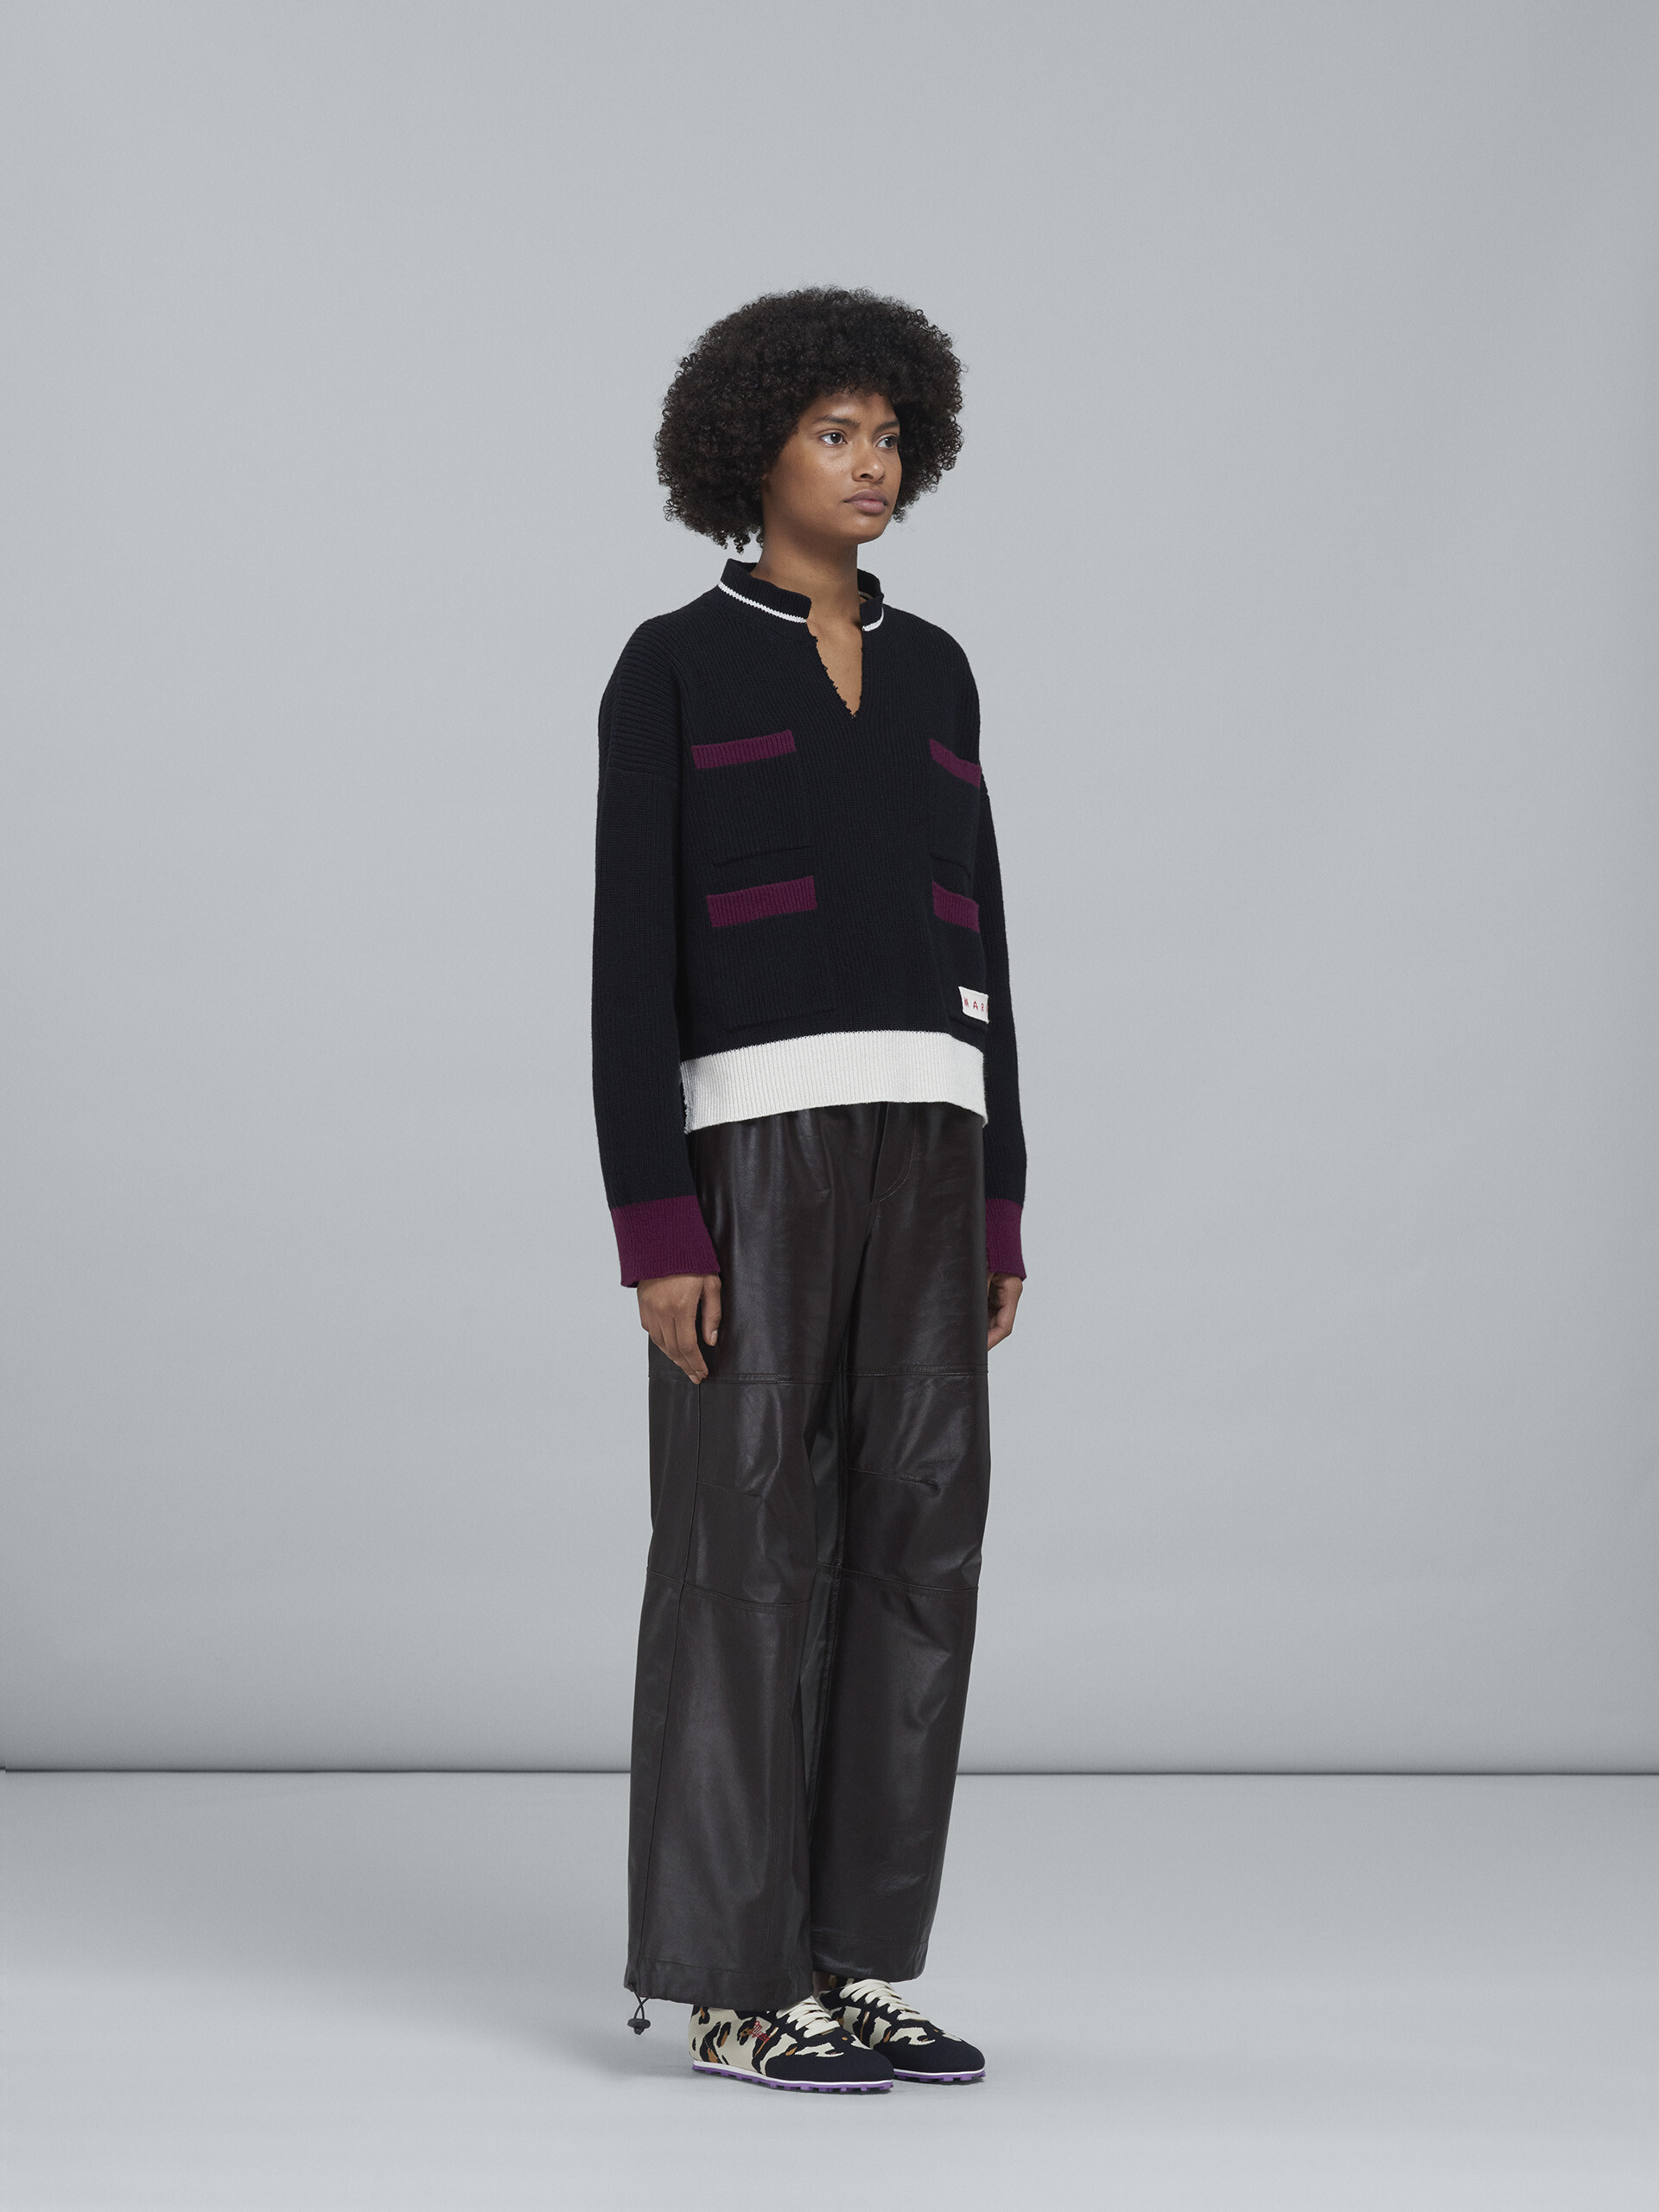 Shetland wool and cotton cropped crewneck sweater - Pullovers - Image 5